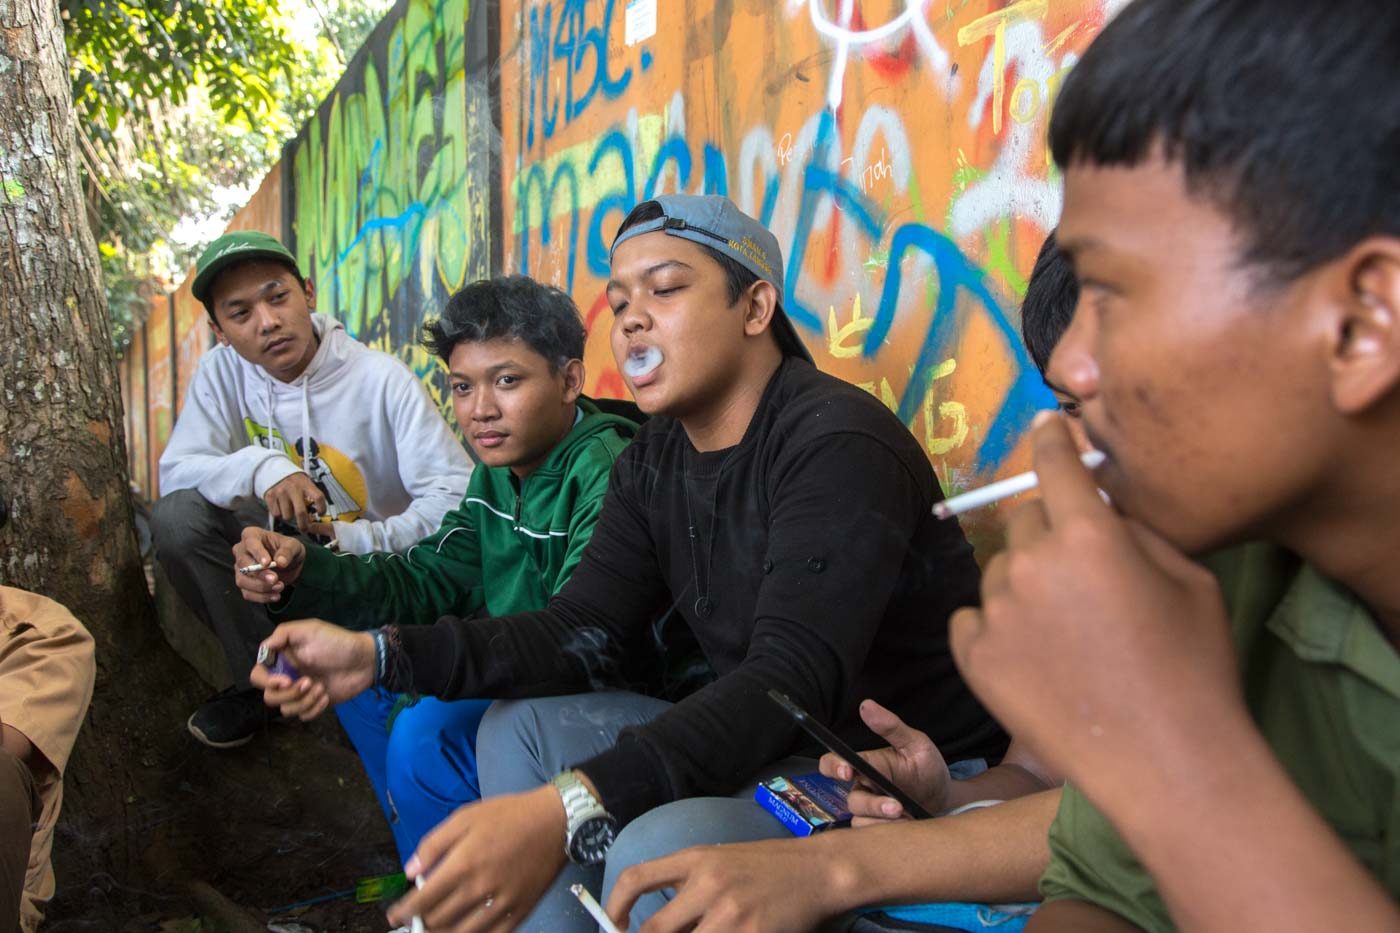 STUDENTS. Students hang out after school while smoking cigarettes in Bogor, West Java. Photo courtesy of Gembong Nusantar/TBIJ 